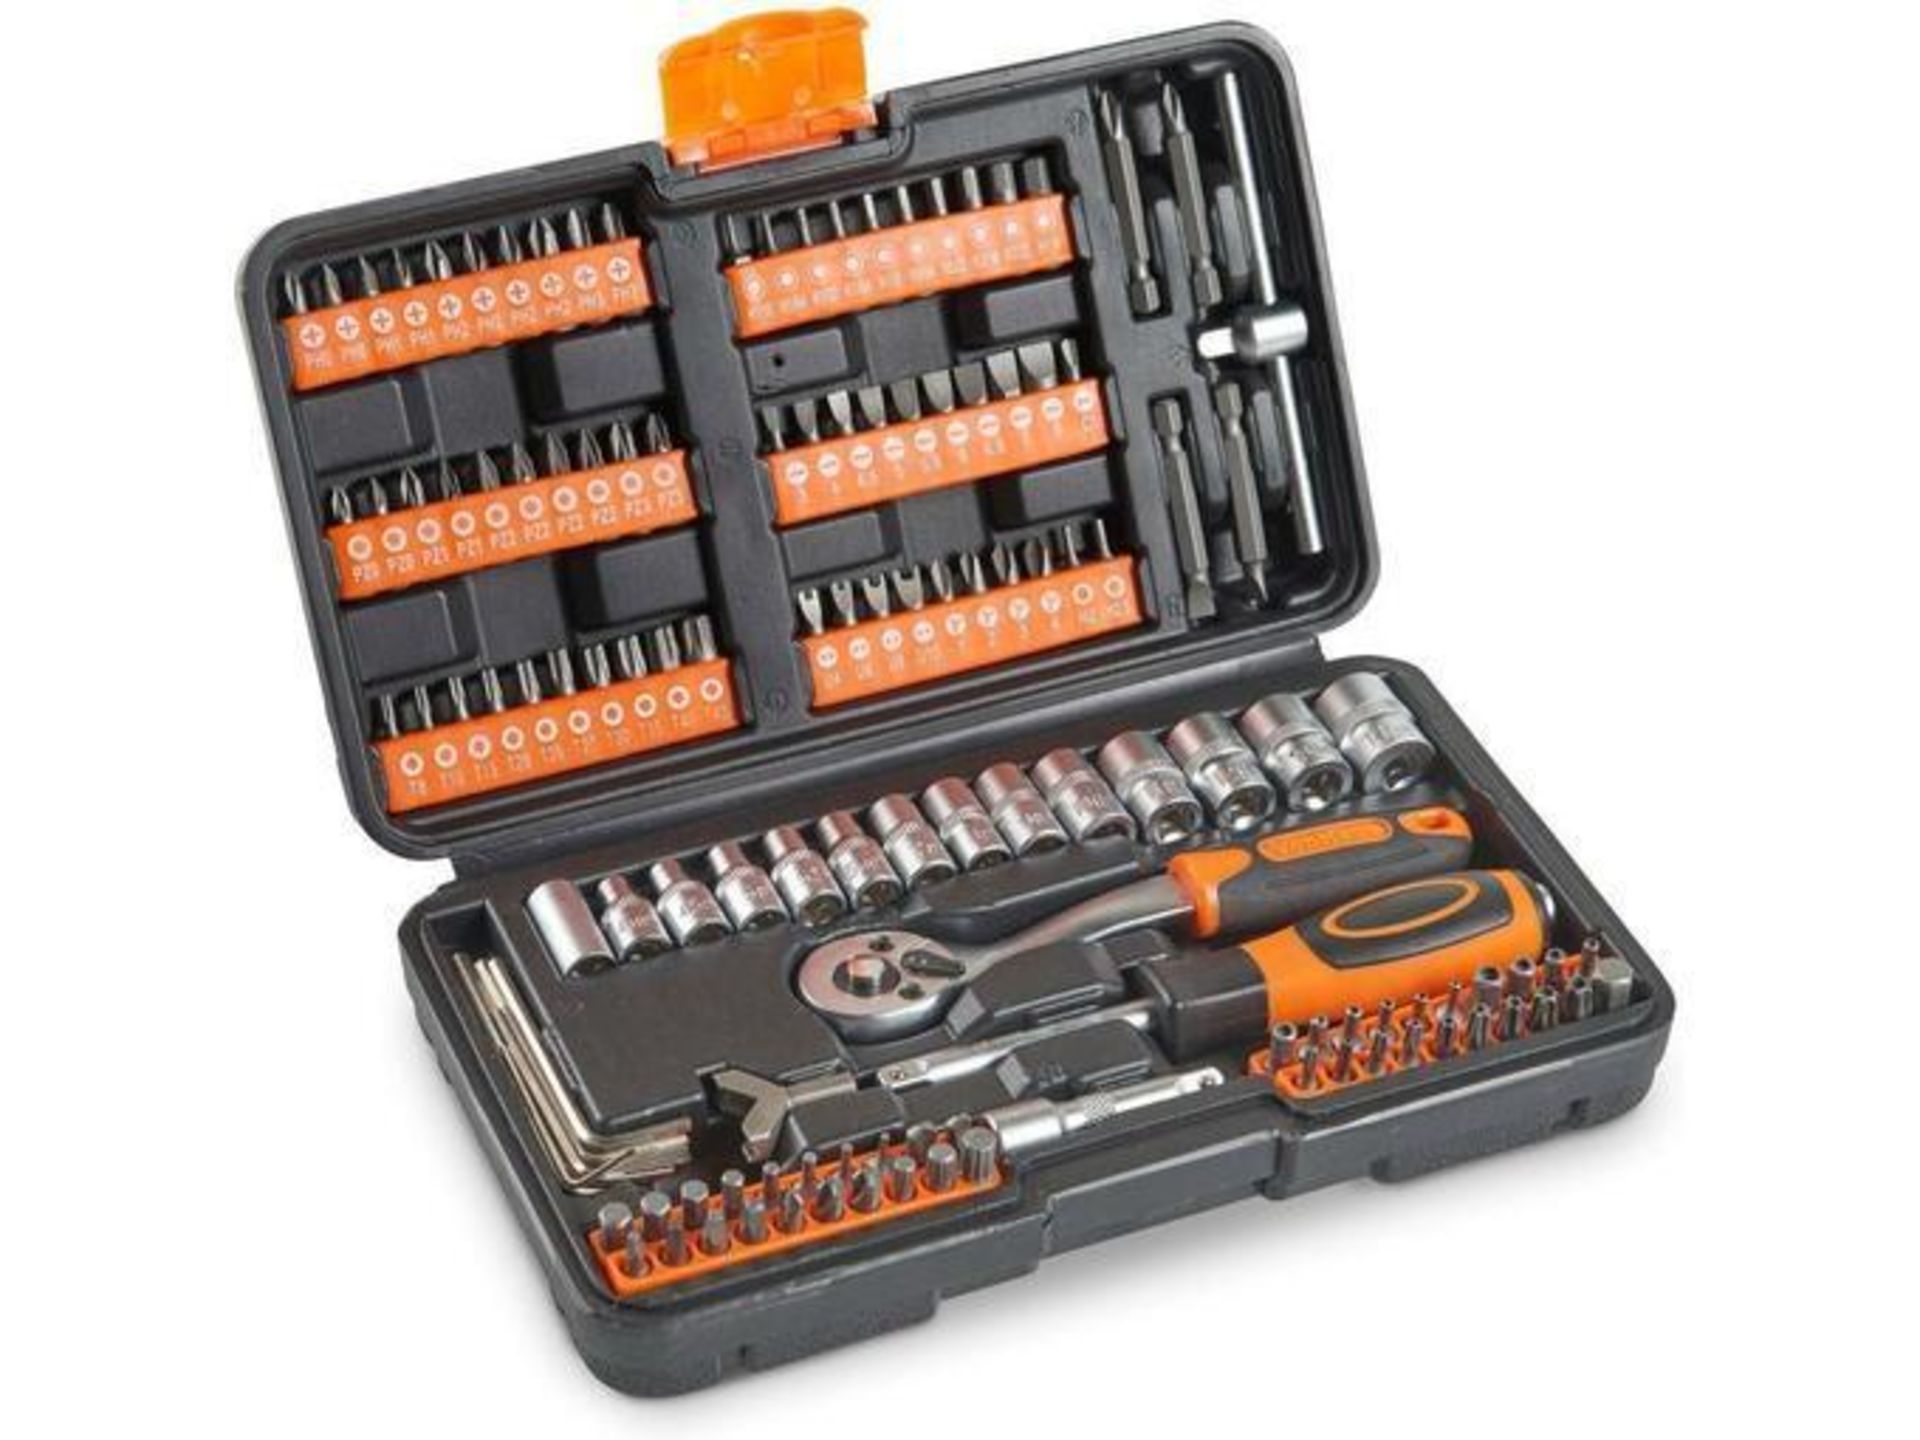 6x 130pc Socket + Bit Set (ER51) Be prepared for the unexpected with the Luxury 130pc Socket + Bit